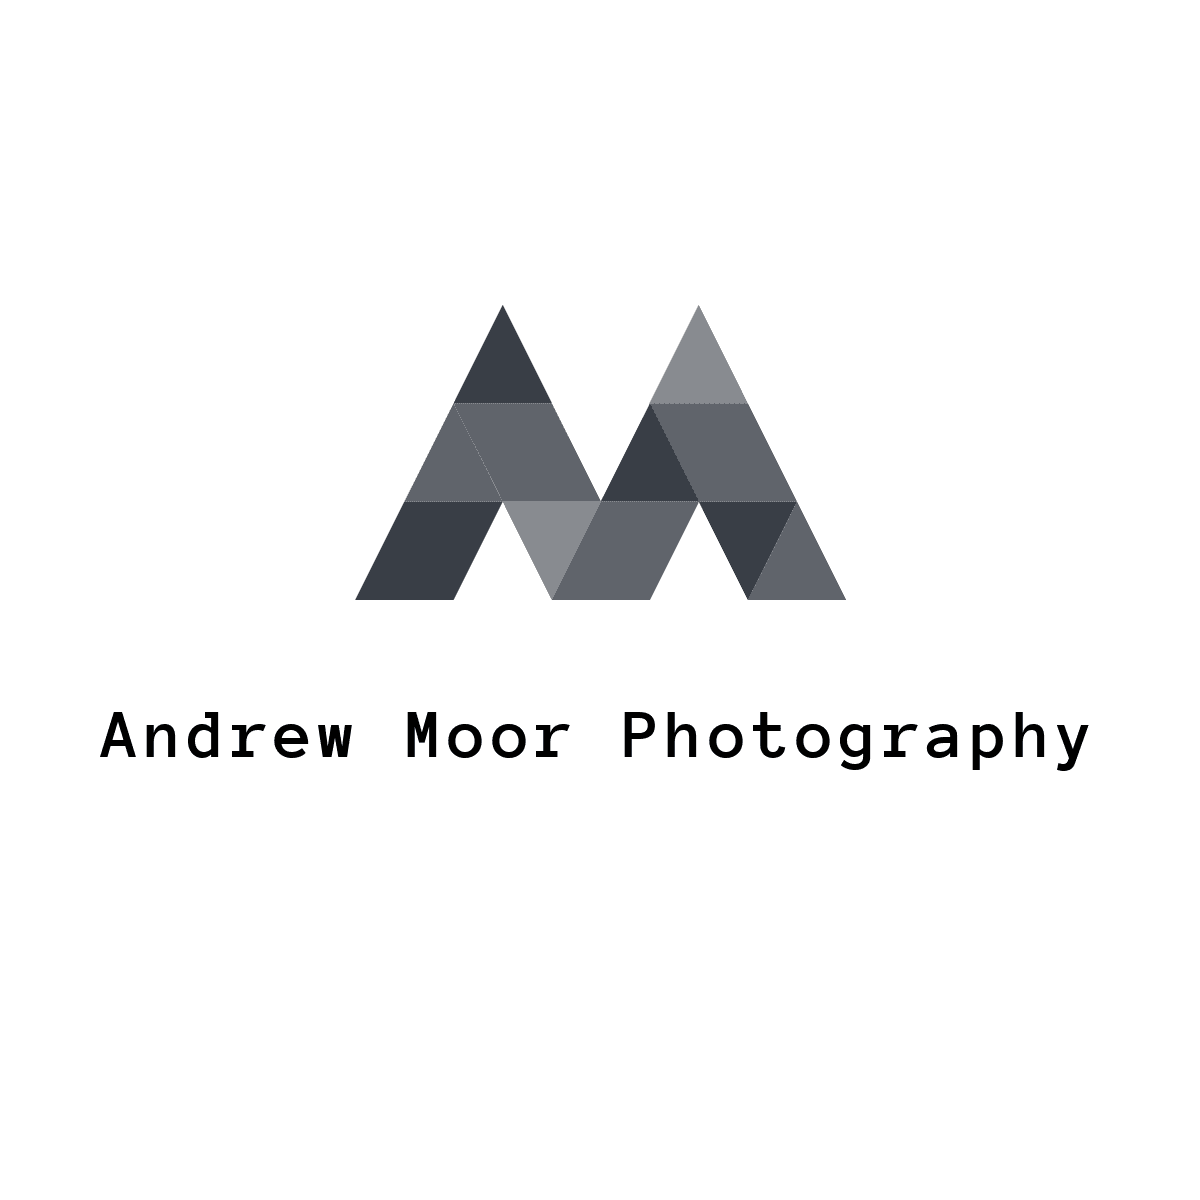 More Changes to the Online Store - Andrew Moor Photography